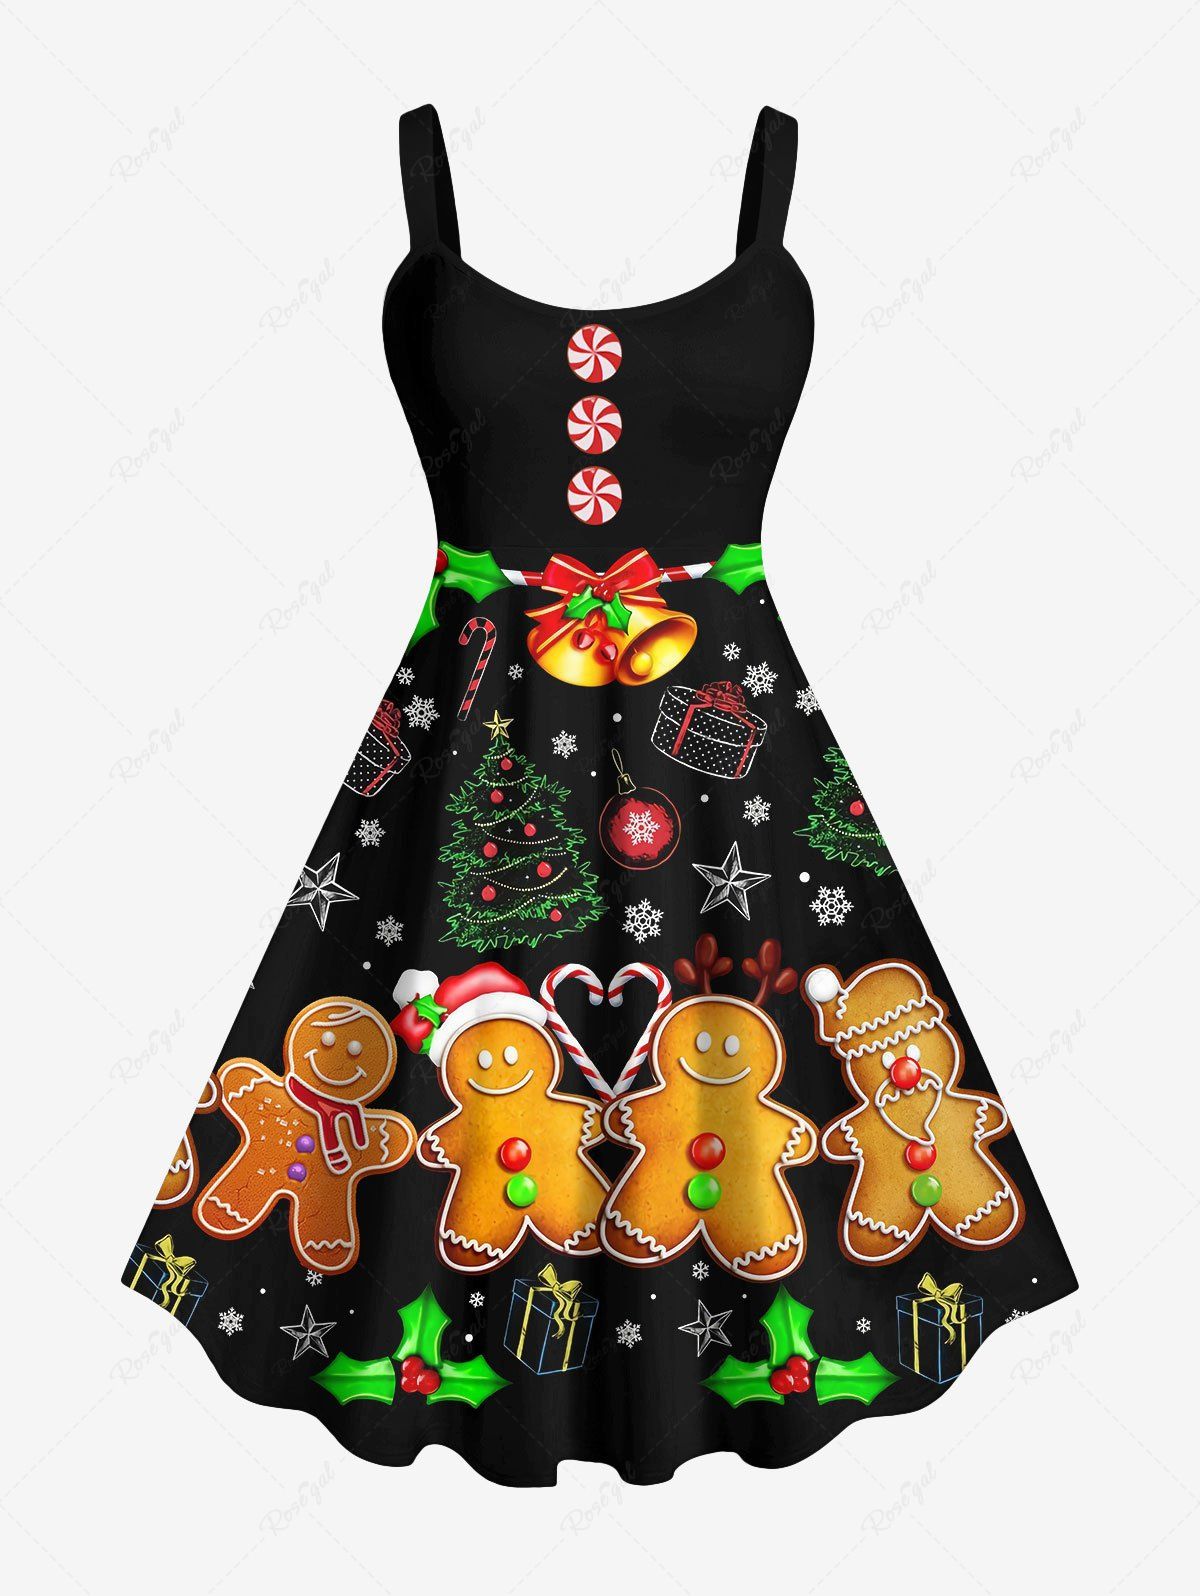 Trendy Plus Size Christmas Tree Bell Gift Candy Star Snowflake Gingerbread Print Tank Dress  